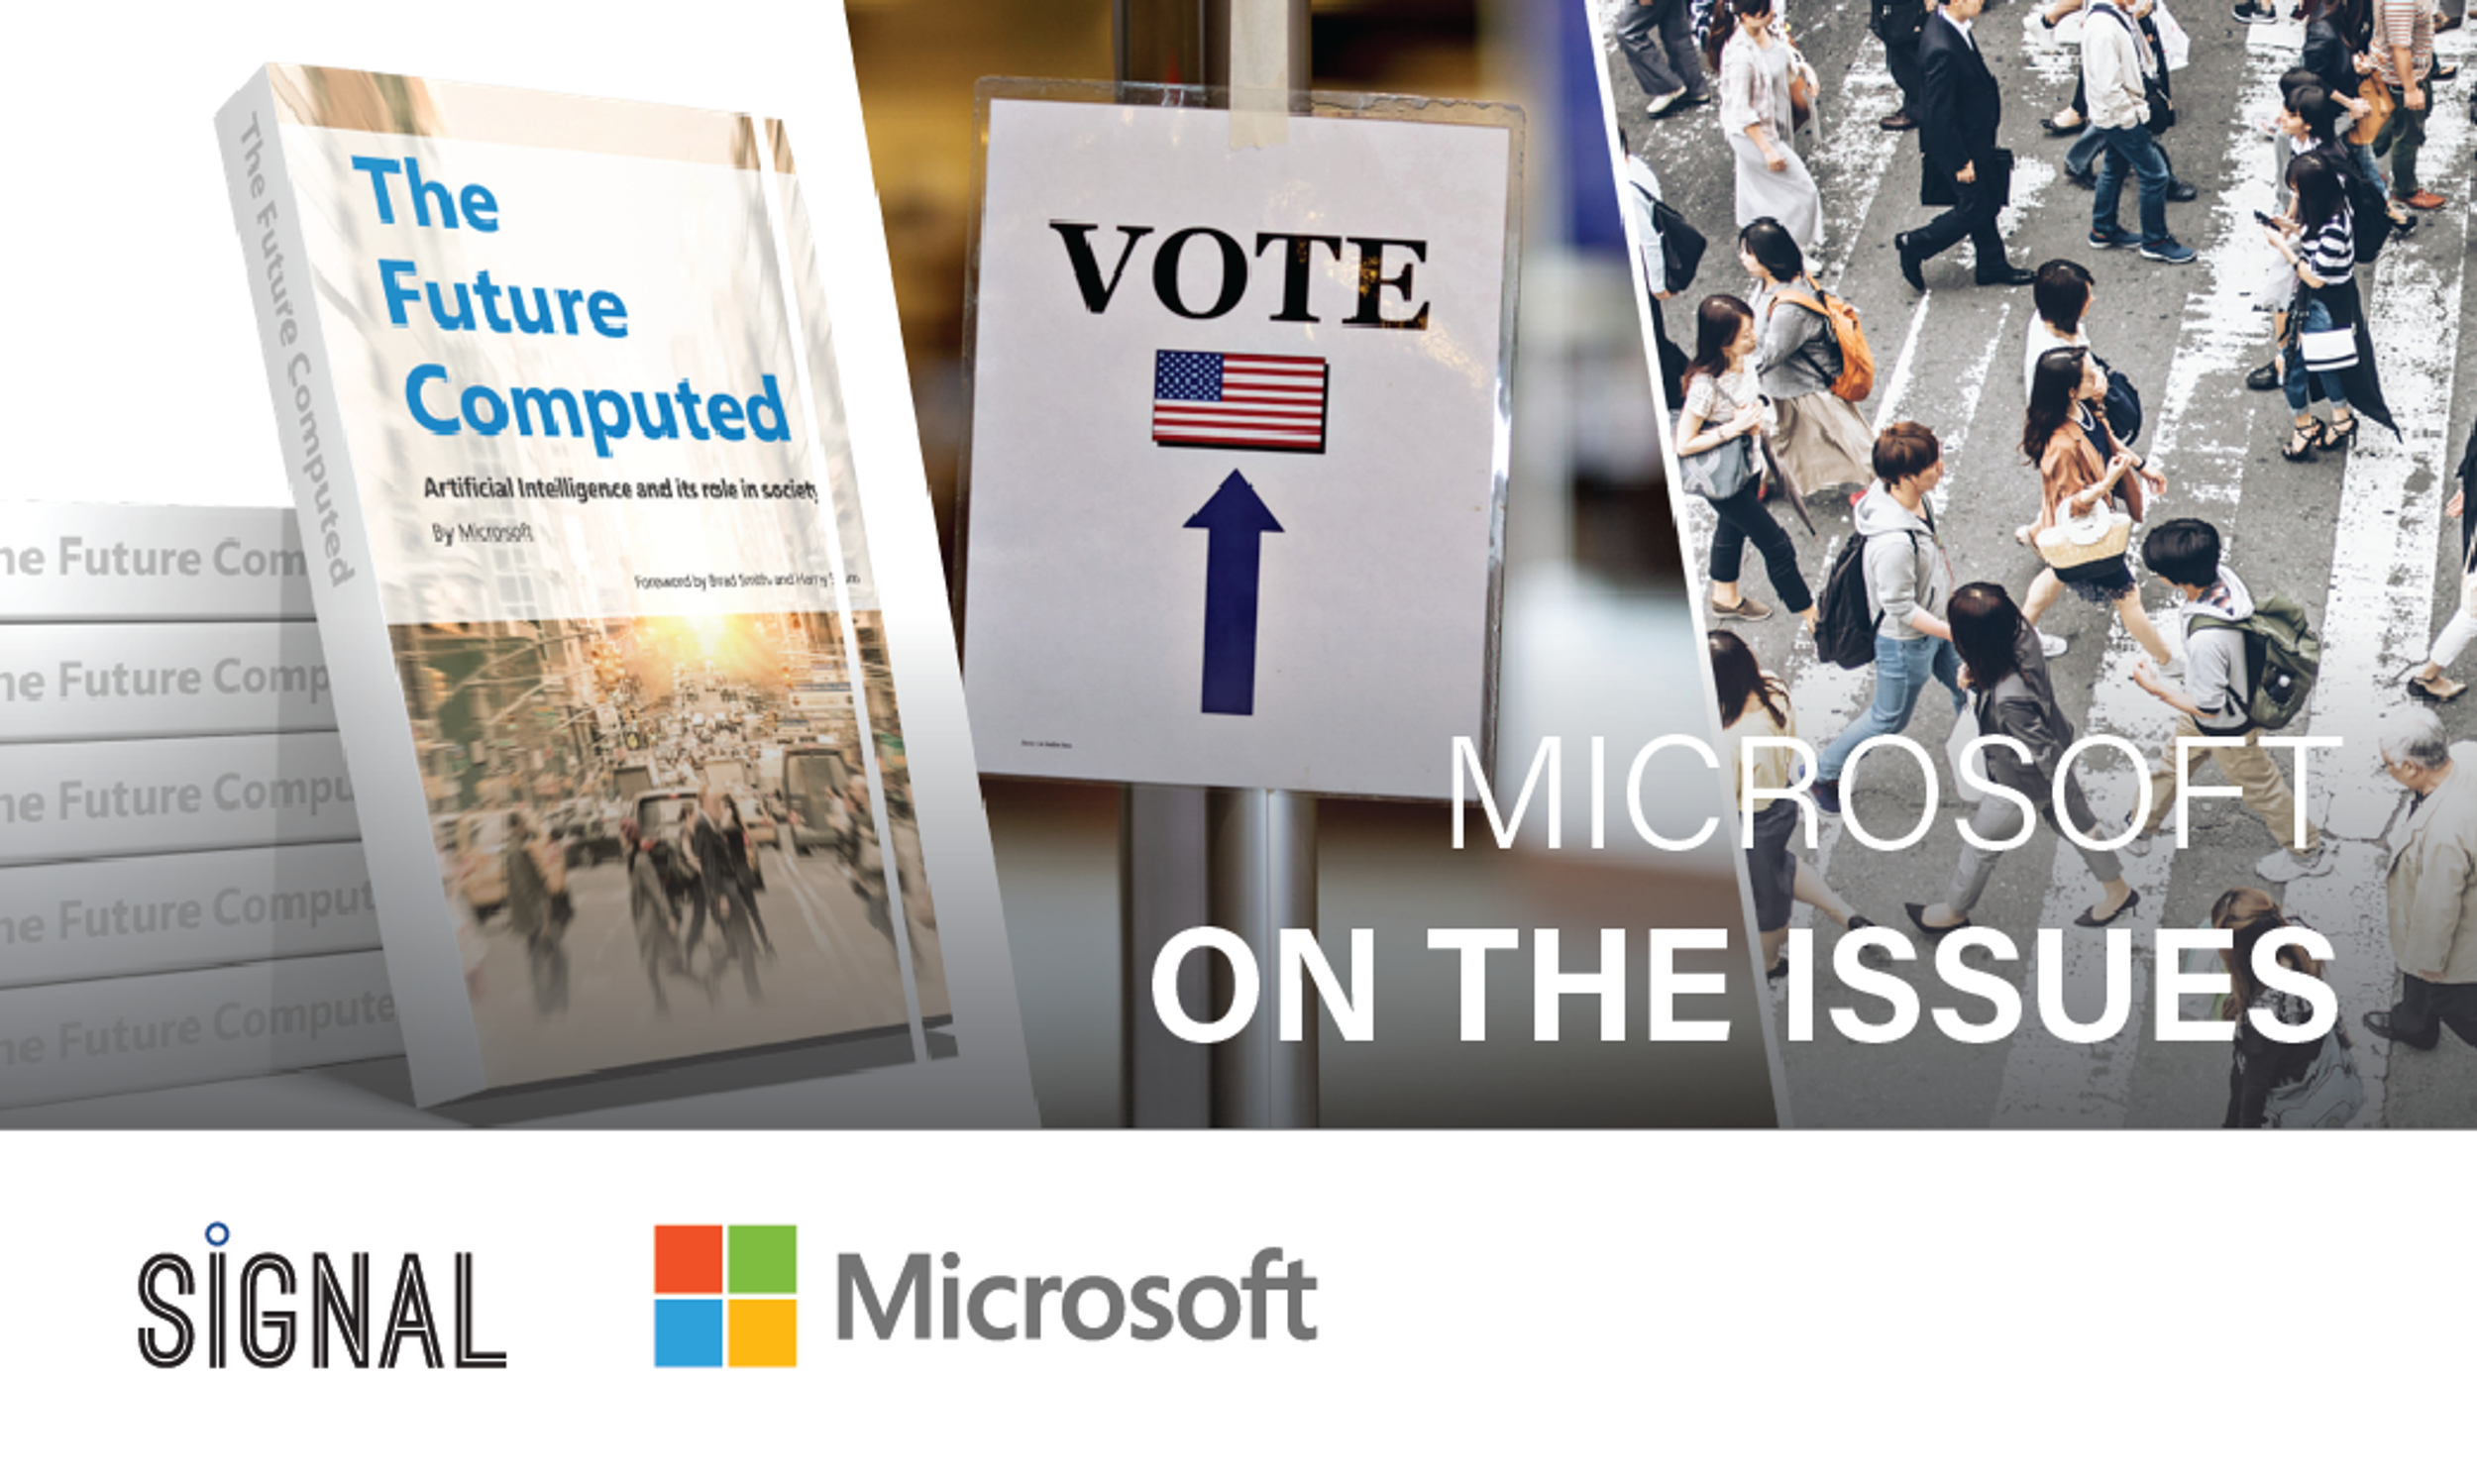 Get the latest news from Microsoft on the most pressing policy issues